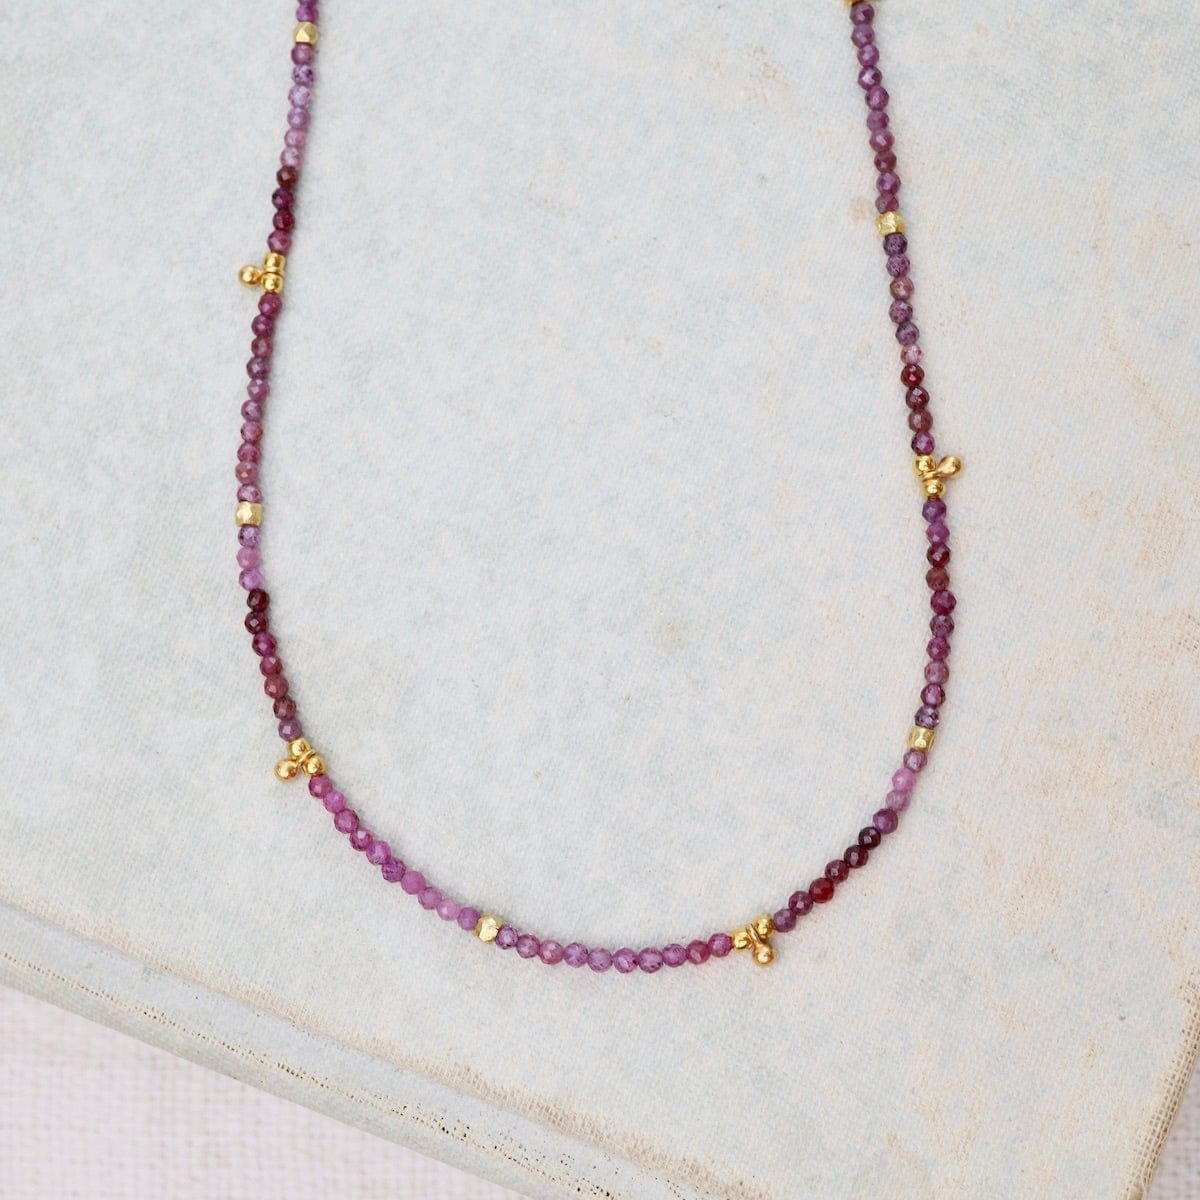 NKL-VRM Ruby, 24kt Vermeil Charms & Beads Necklace